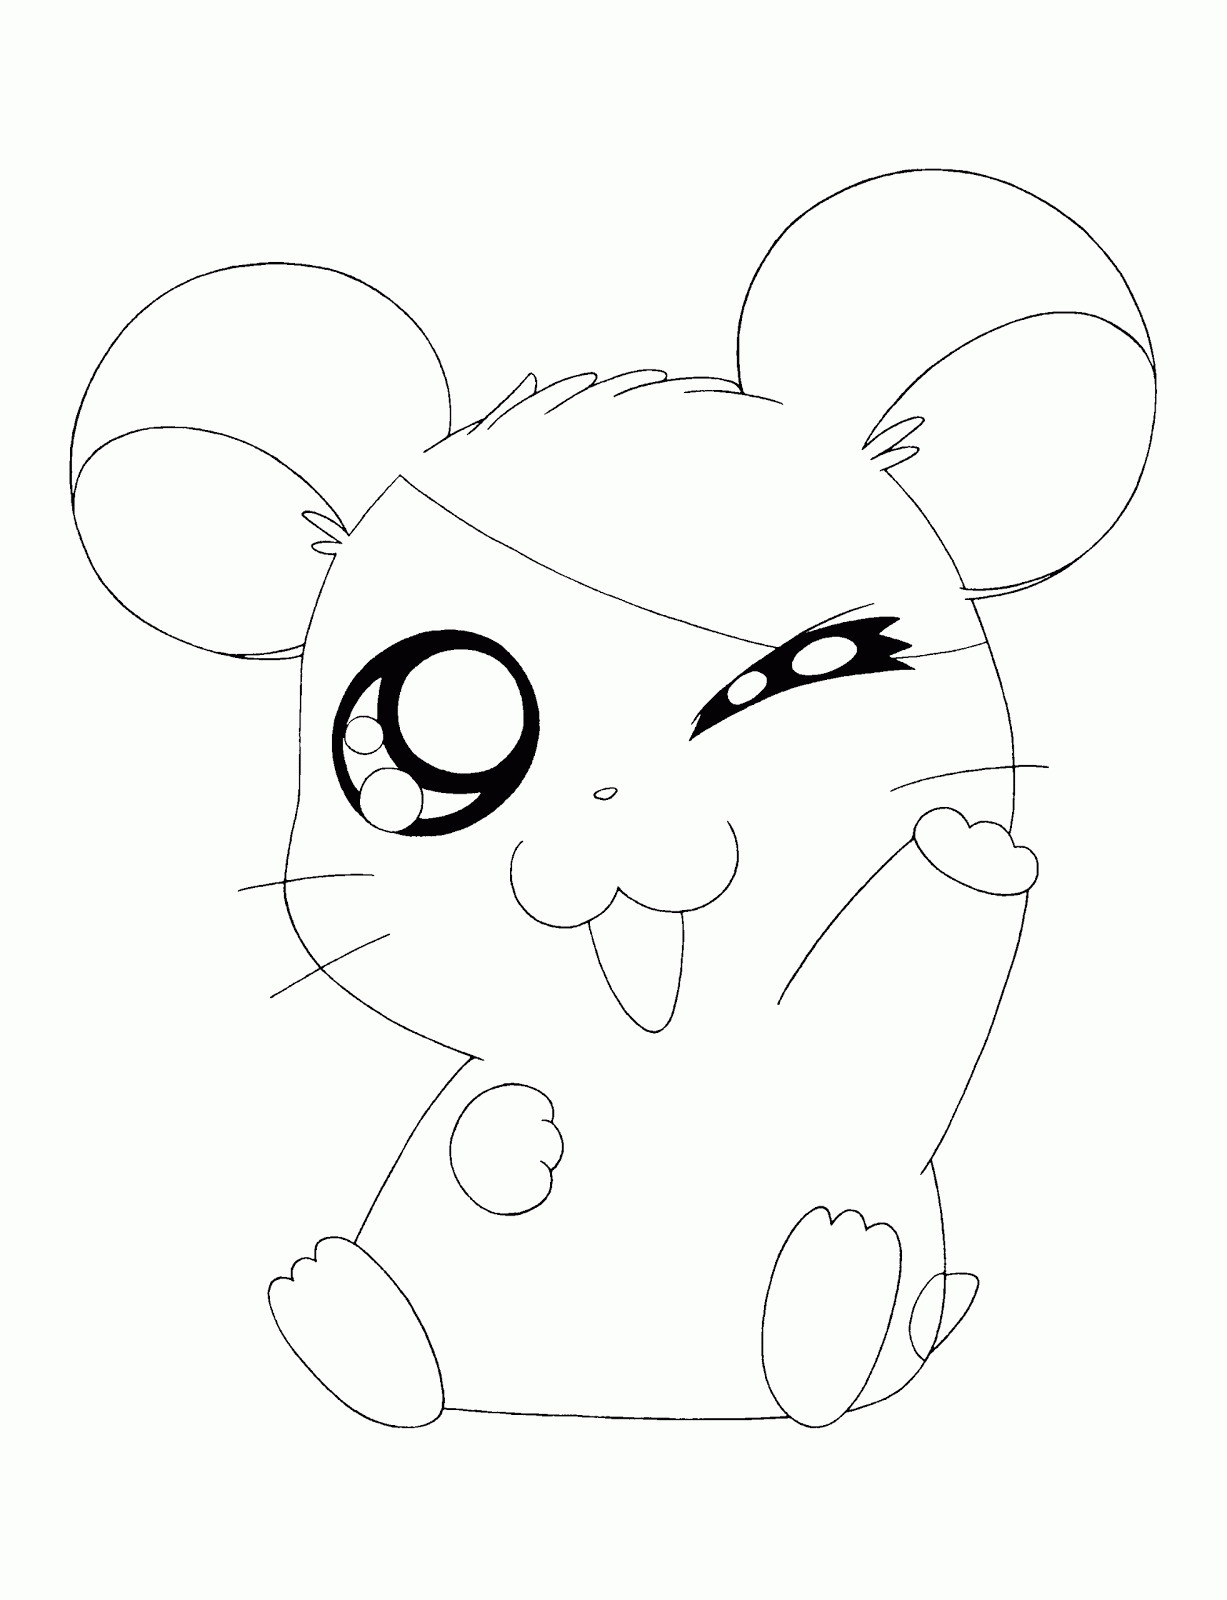 Cute Coloring Pages For Girls Az Coloring Pages. Cute Animal ...